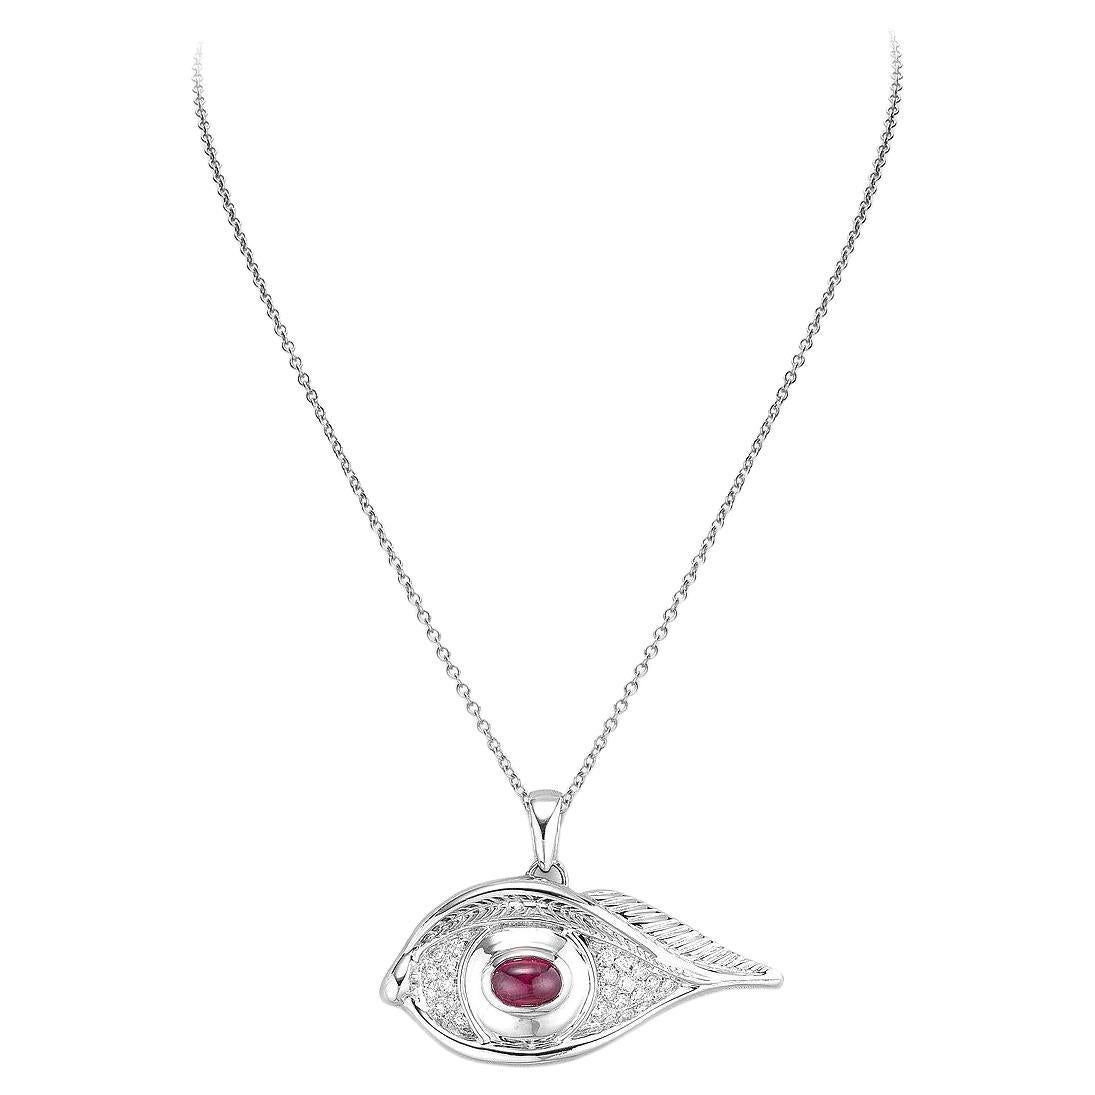 Eye Pendant Necklace with Ruby